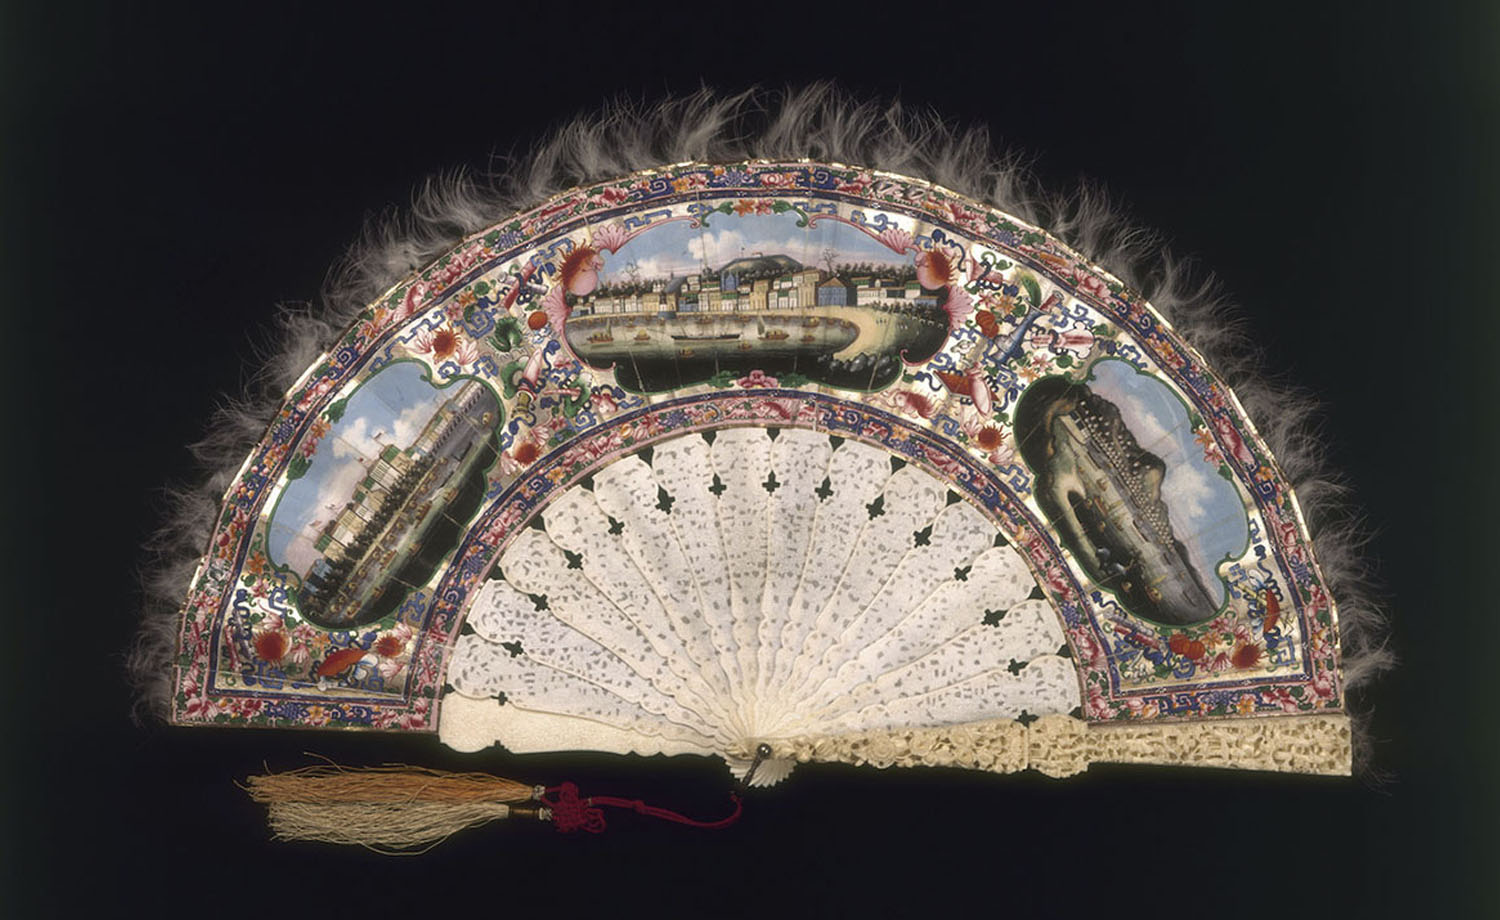 Folding fan with ivory sticks depicting views of Canton, Macao and Hong Kong